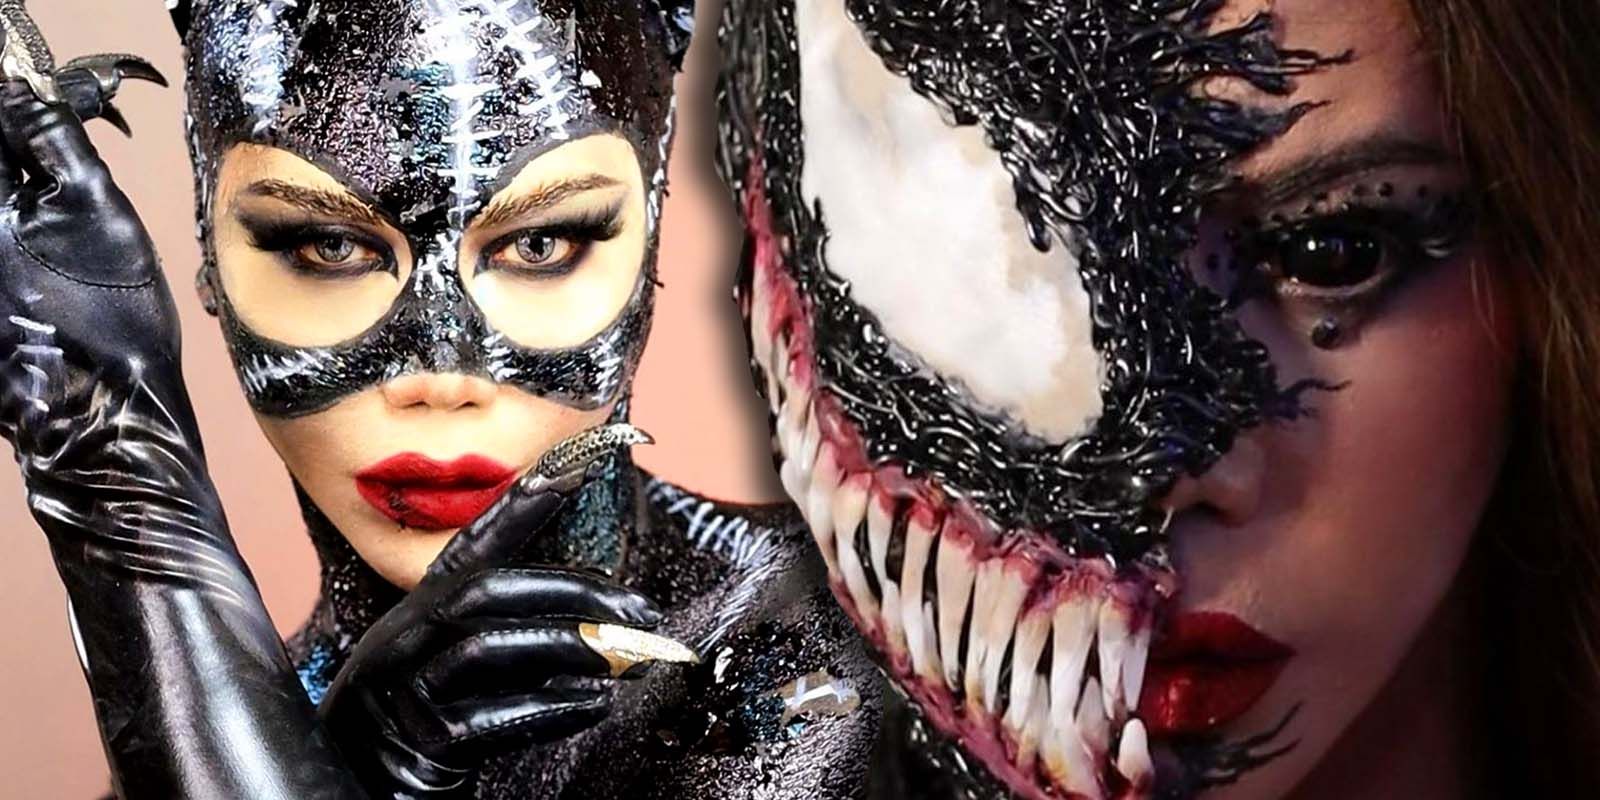 Cosplayer turns herself into Venom and Catwoman with makeup.